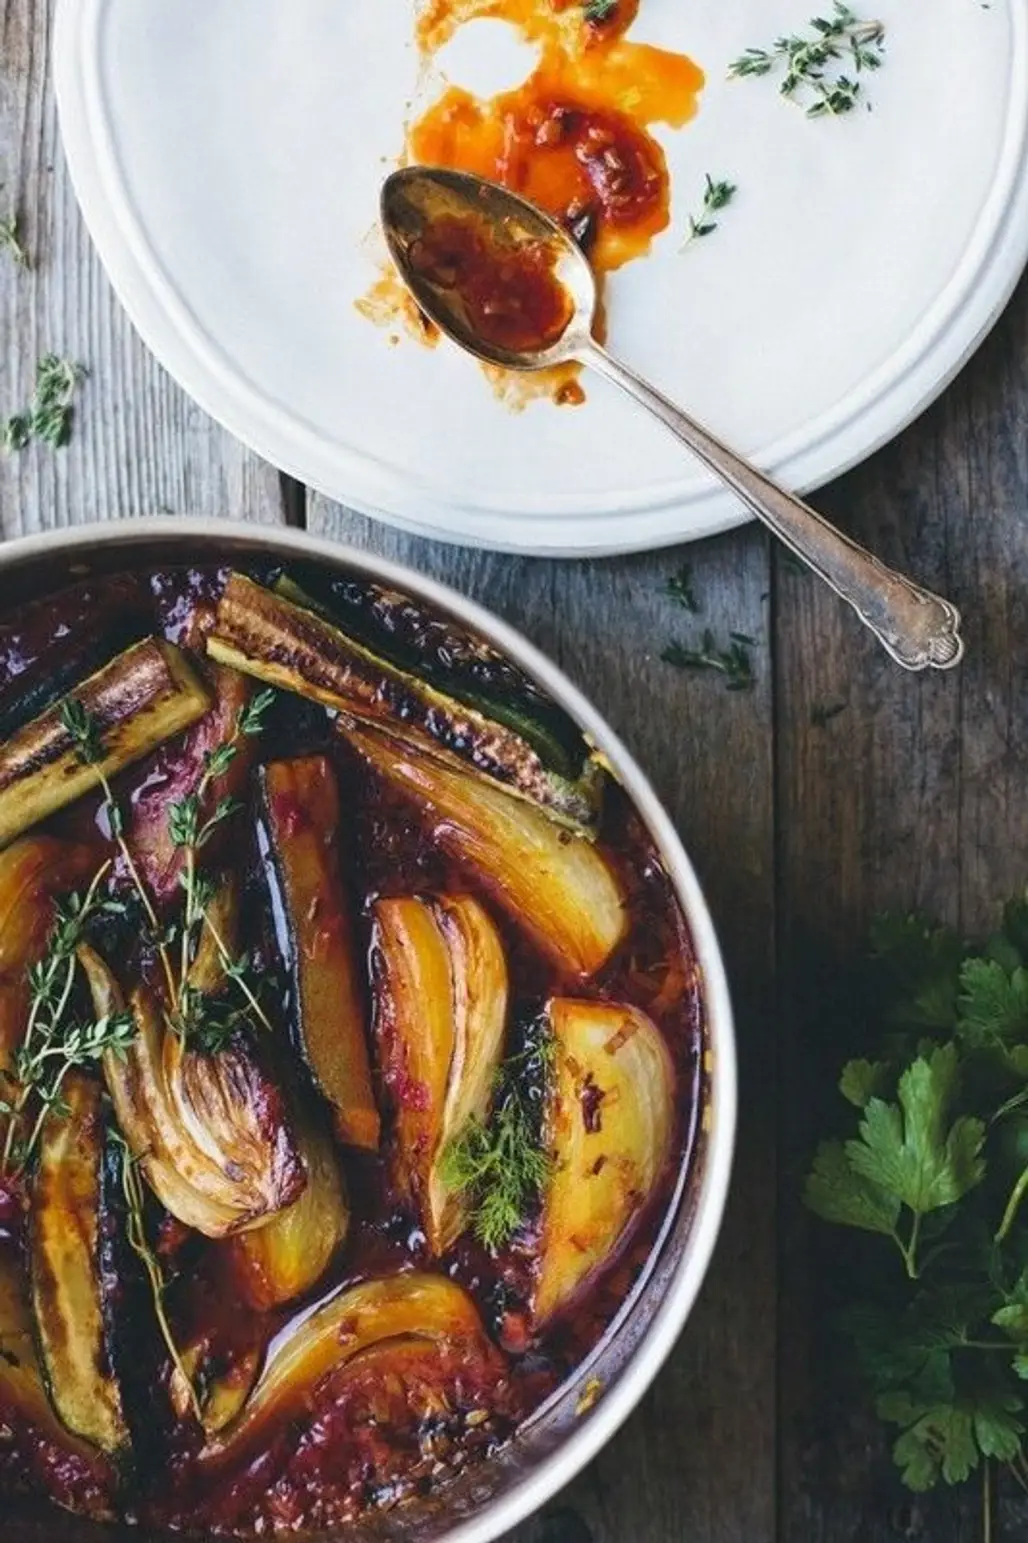 Braised Fennel Wedges with Saffron, Tomato, Zucchini and Thyme